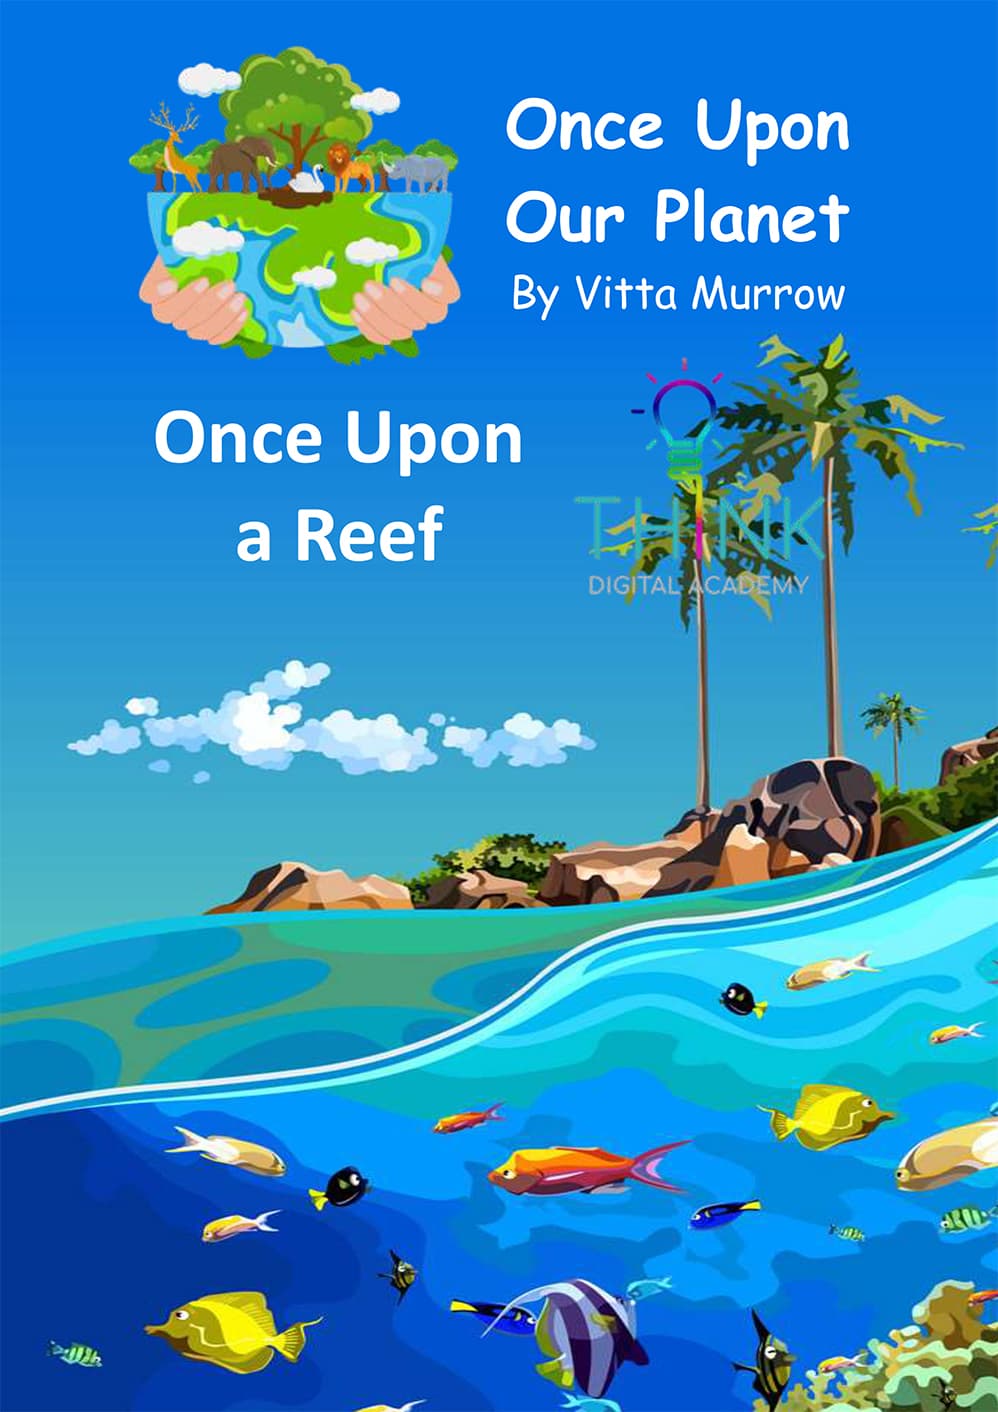 Enjoy reading Once Up in a Reef in our Reading Room series.